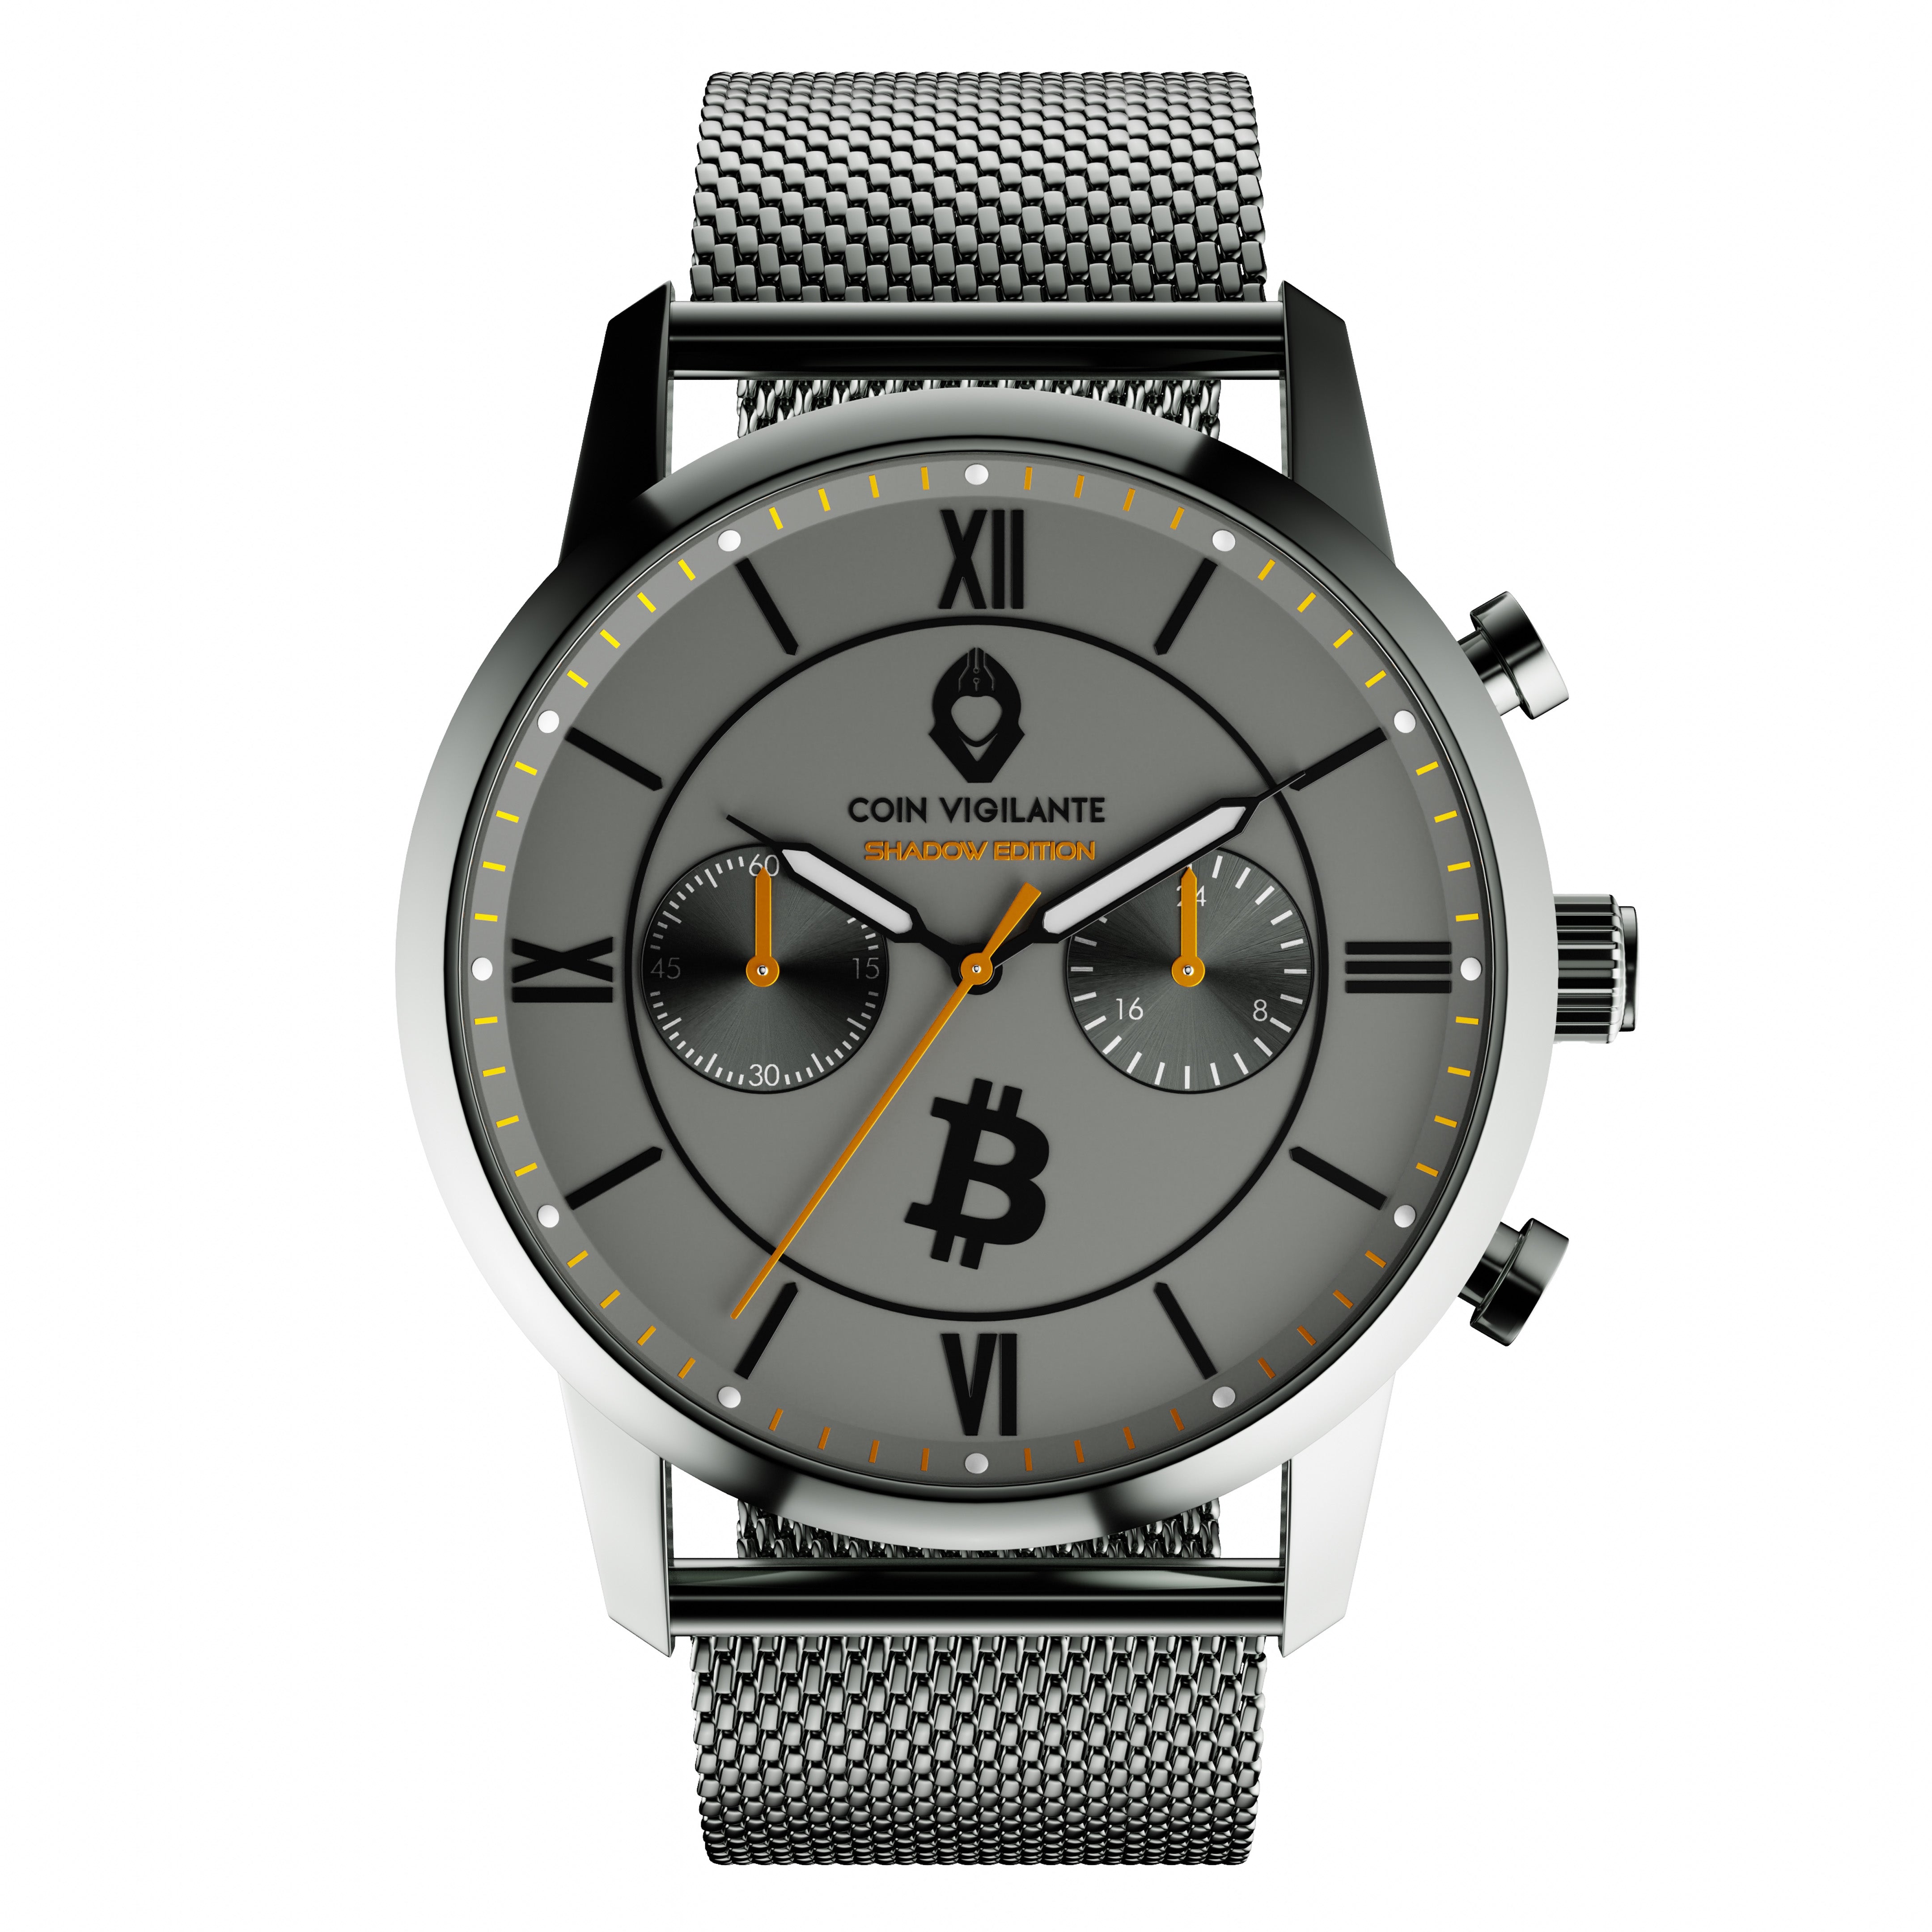 Close-up view of the Shadow Edition Bitcoin Watch by Coin Vigilante with gunmetal mesh strap